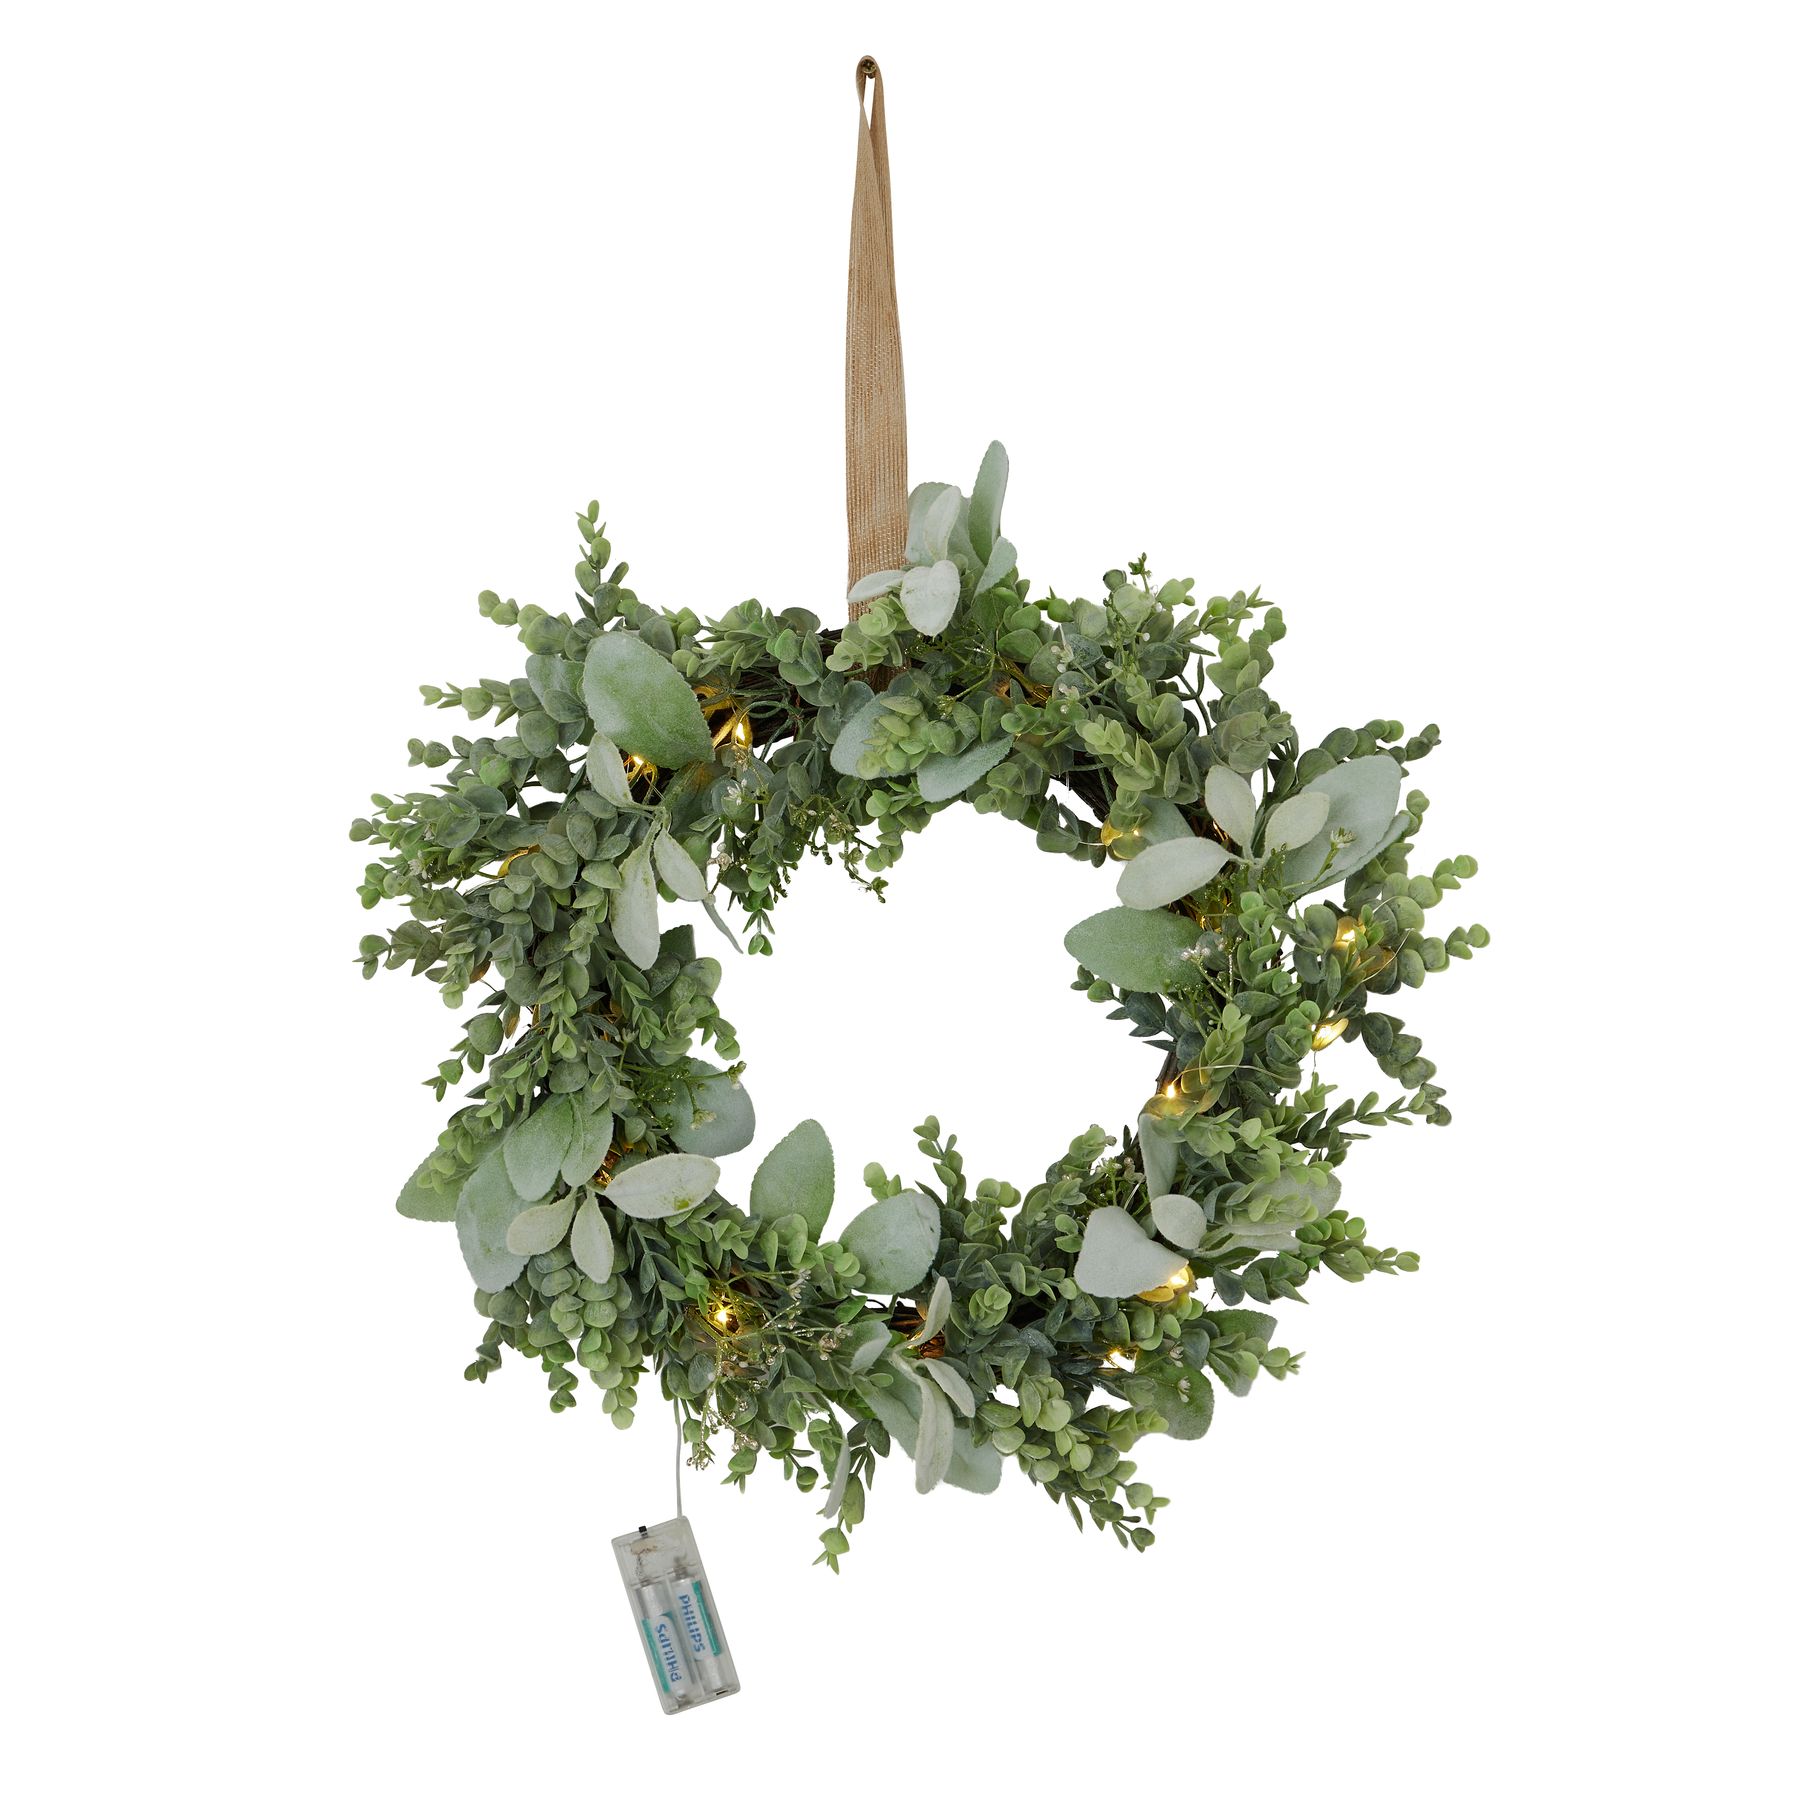 LED Winter Wreath With Eucalyptus And Lambs Ear - Image 1